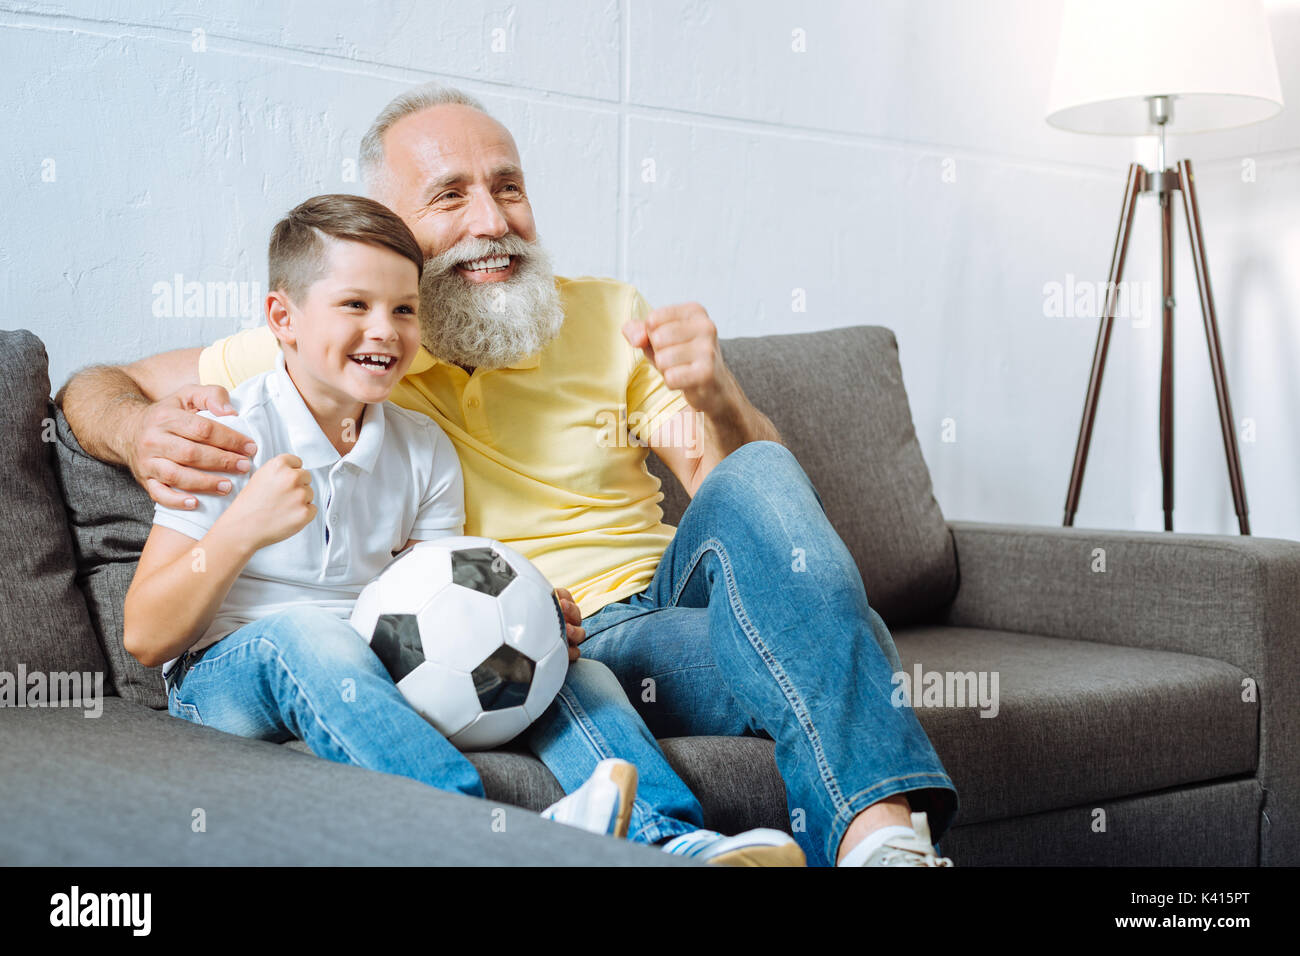 Grandfather and grandson rooting for their favorite football team Stock Photo